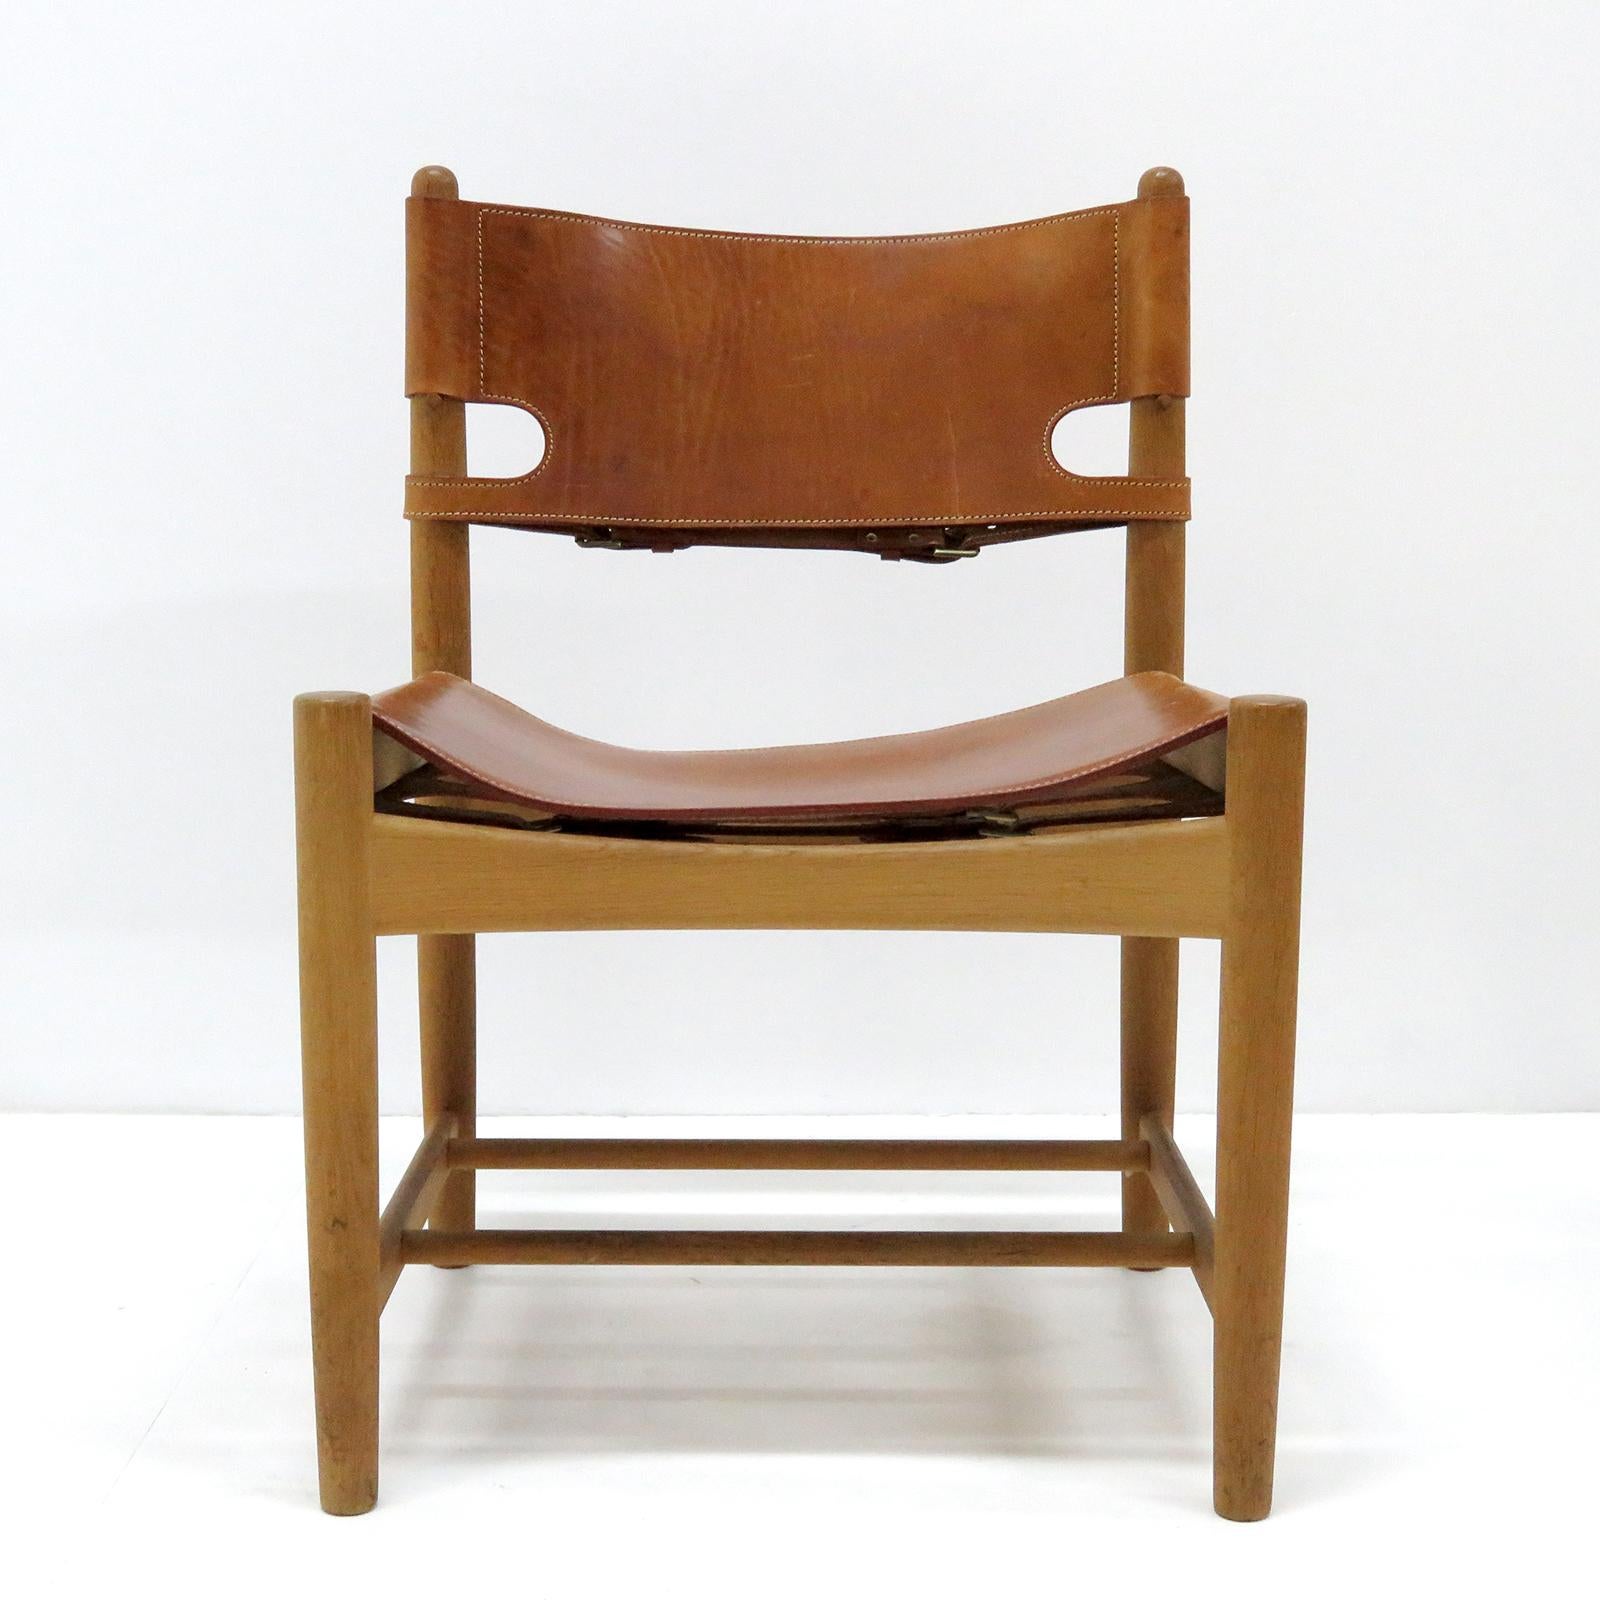 Wonderful Børge Mogensen 'Hunting' chairs, model no. 3237 for Fredericia Furniture, with saddle leather on oak frames, great patina. Priced individually.